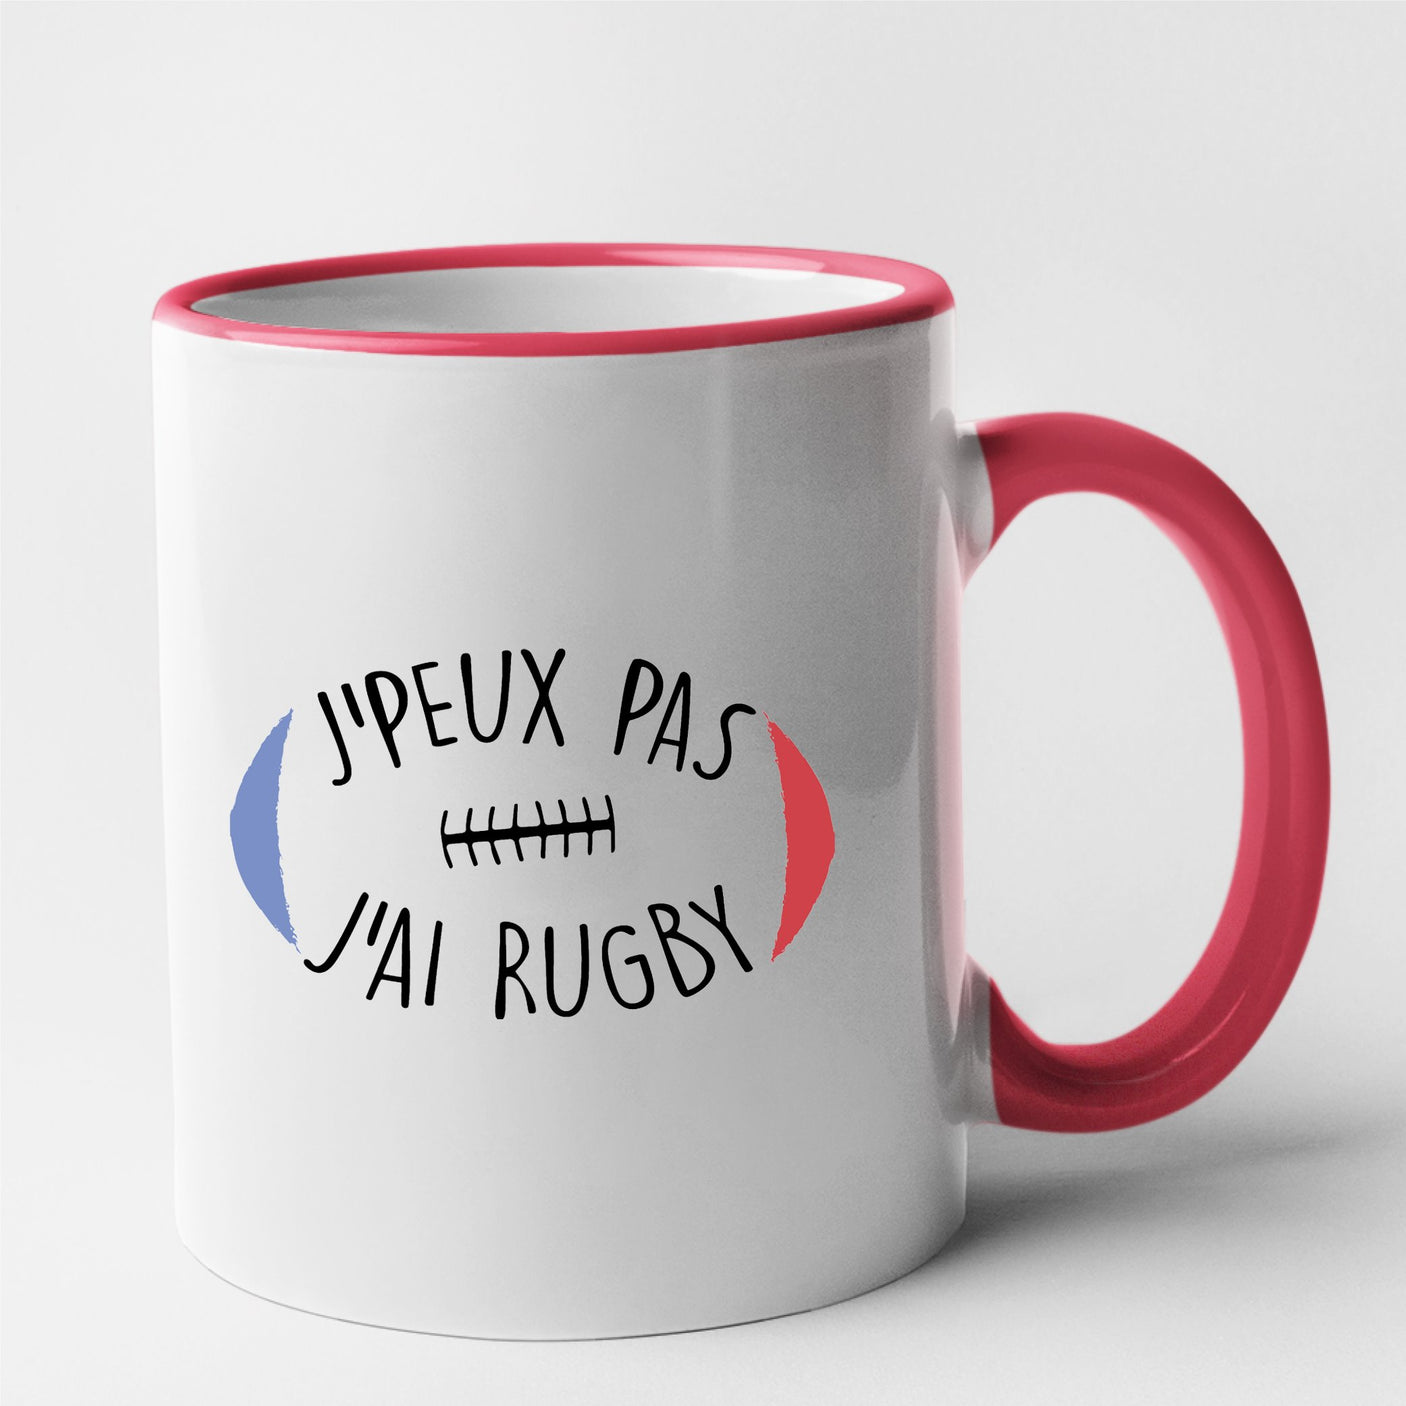 Tasse personnalisée rugby - Cadeau humour rugby